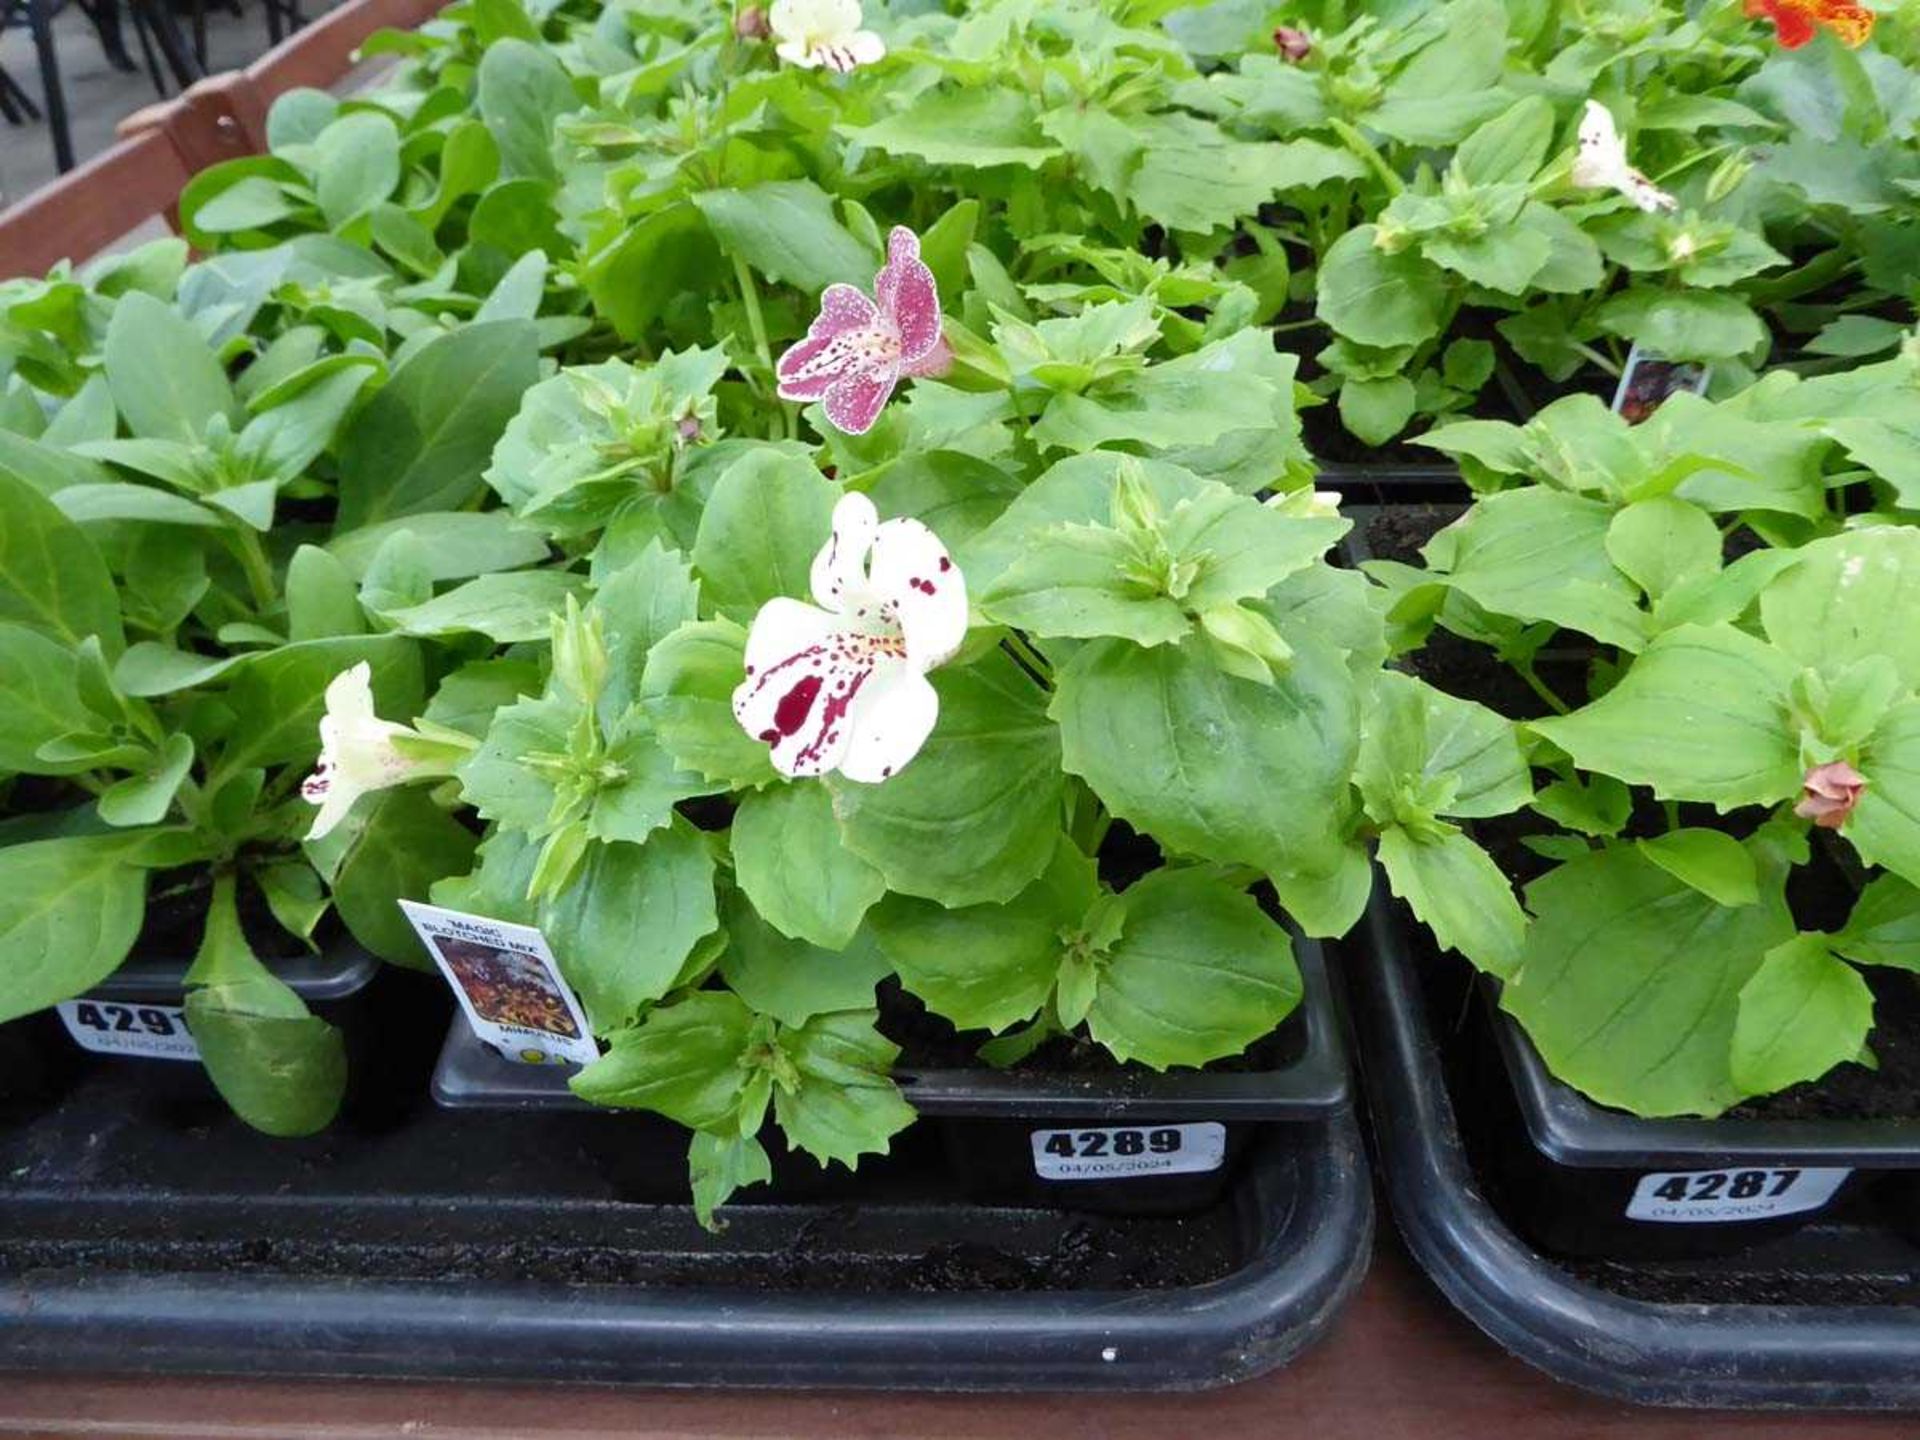 Tray of Mimulus plants